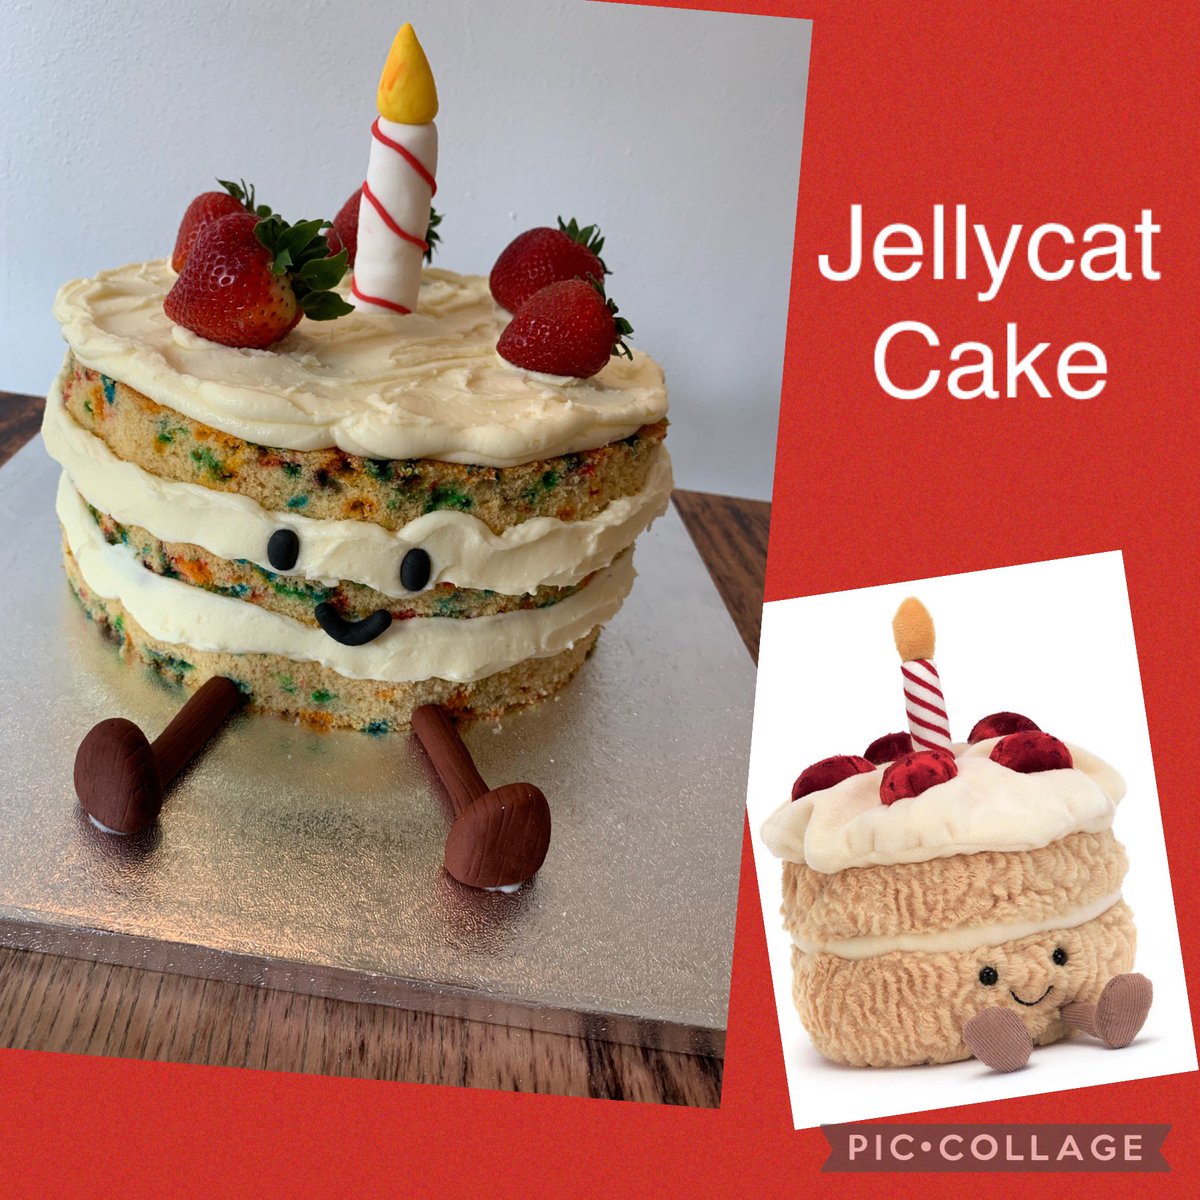 I think this might be the first time we’ve made a cake to match a @jellycat soft toy! Our lovely customer said “Just wanted to say how terrific Isobel’s jelly-cat birthday cake was. It tasted as great as it looked. Thank you - she was thrilled with it!” Such a fun order! 🥰